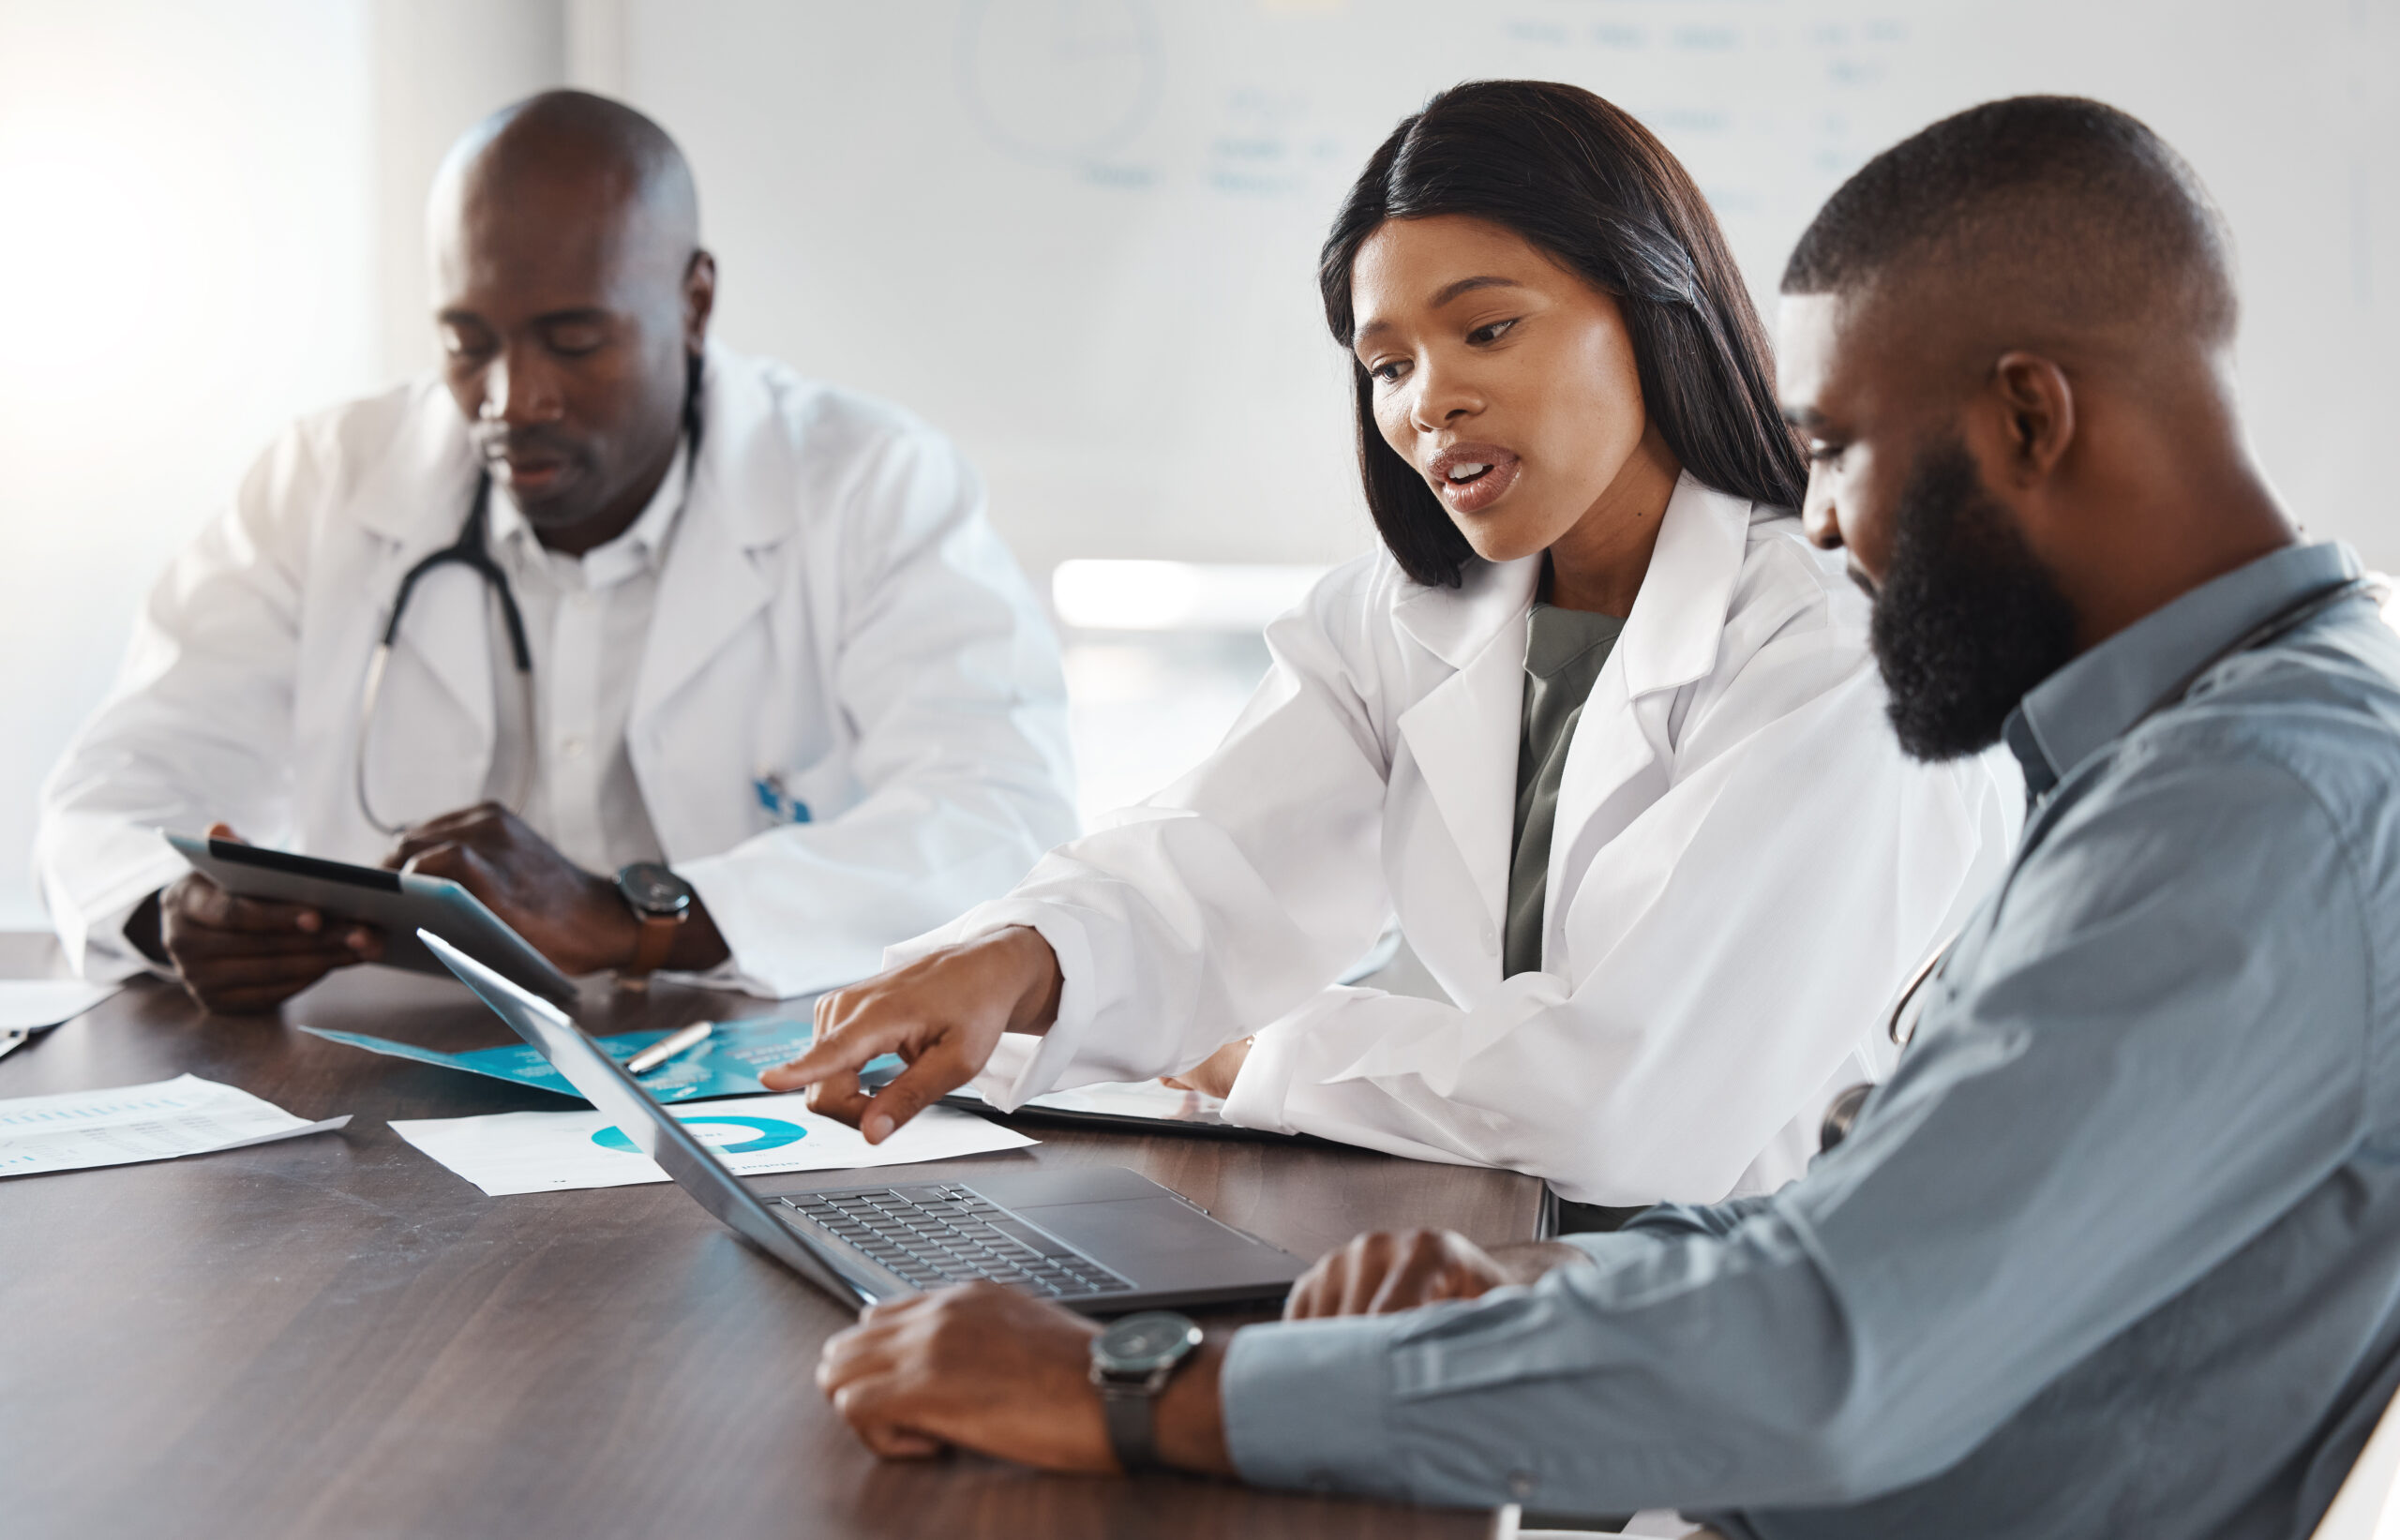 How Health Care Companies Should Approach Their Diversity Action Plans for Clinical Trials